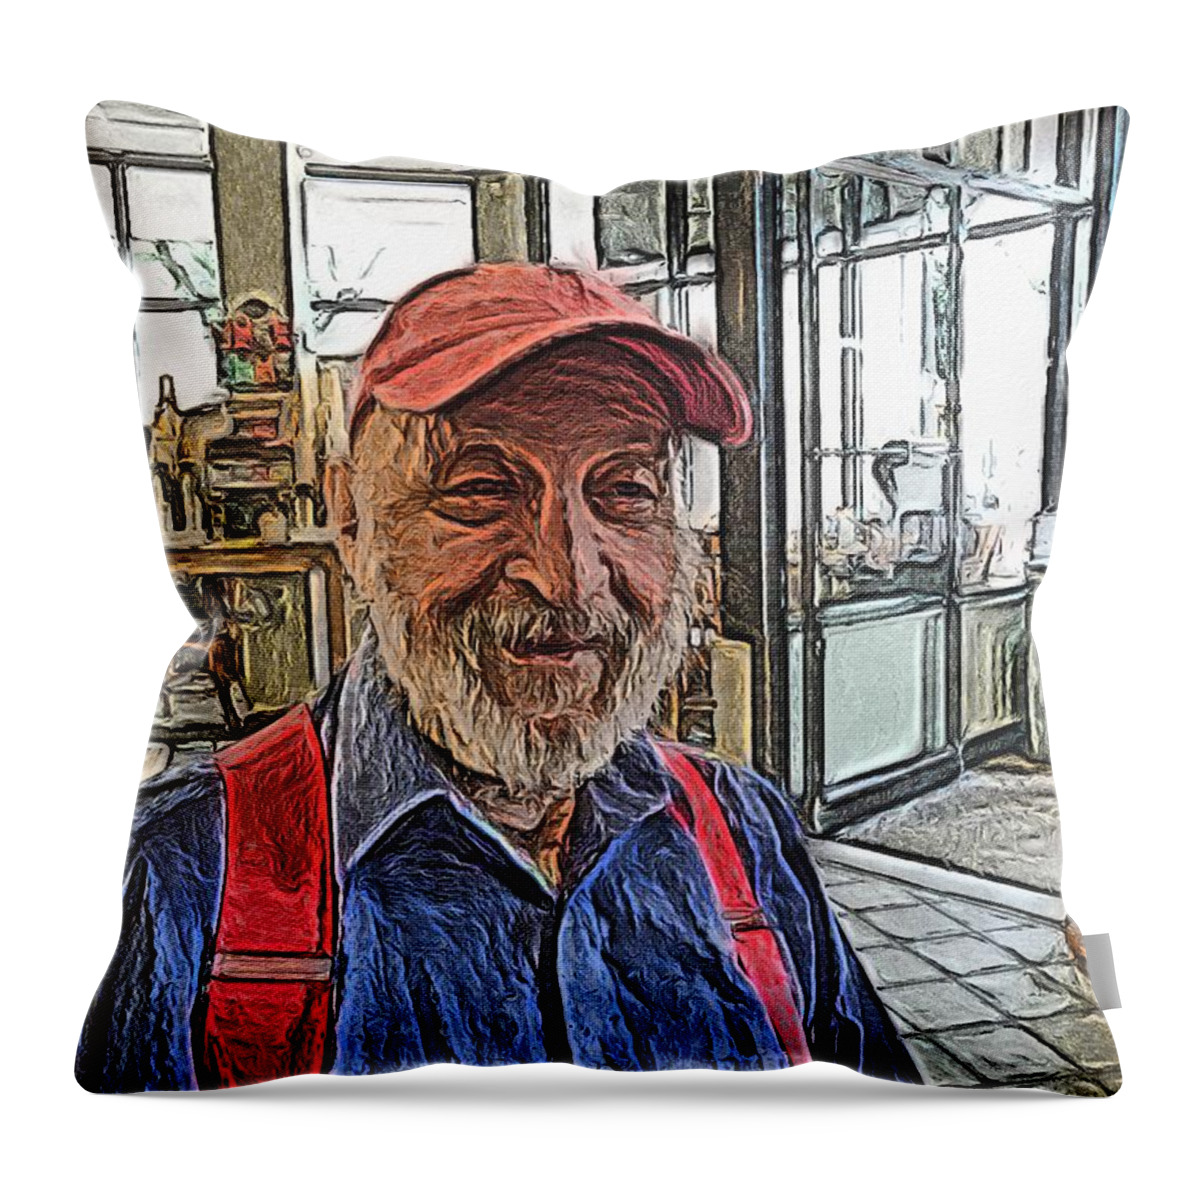 Photoshop Throw Pillow featuring the digital art Burt just published by Steve Glines